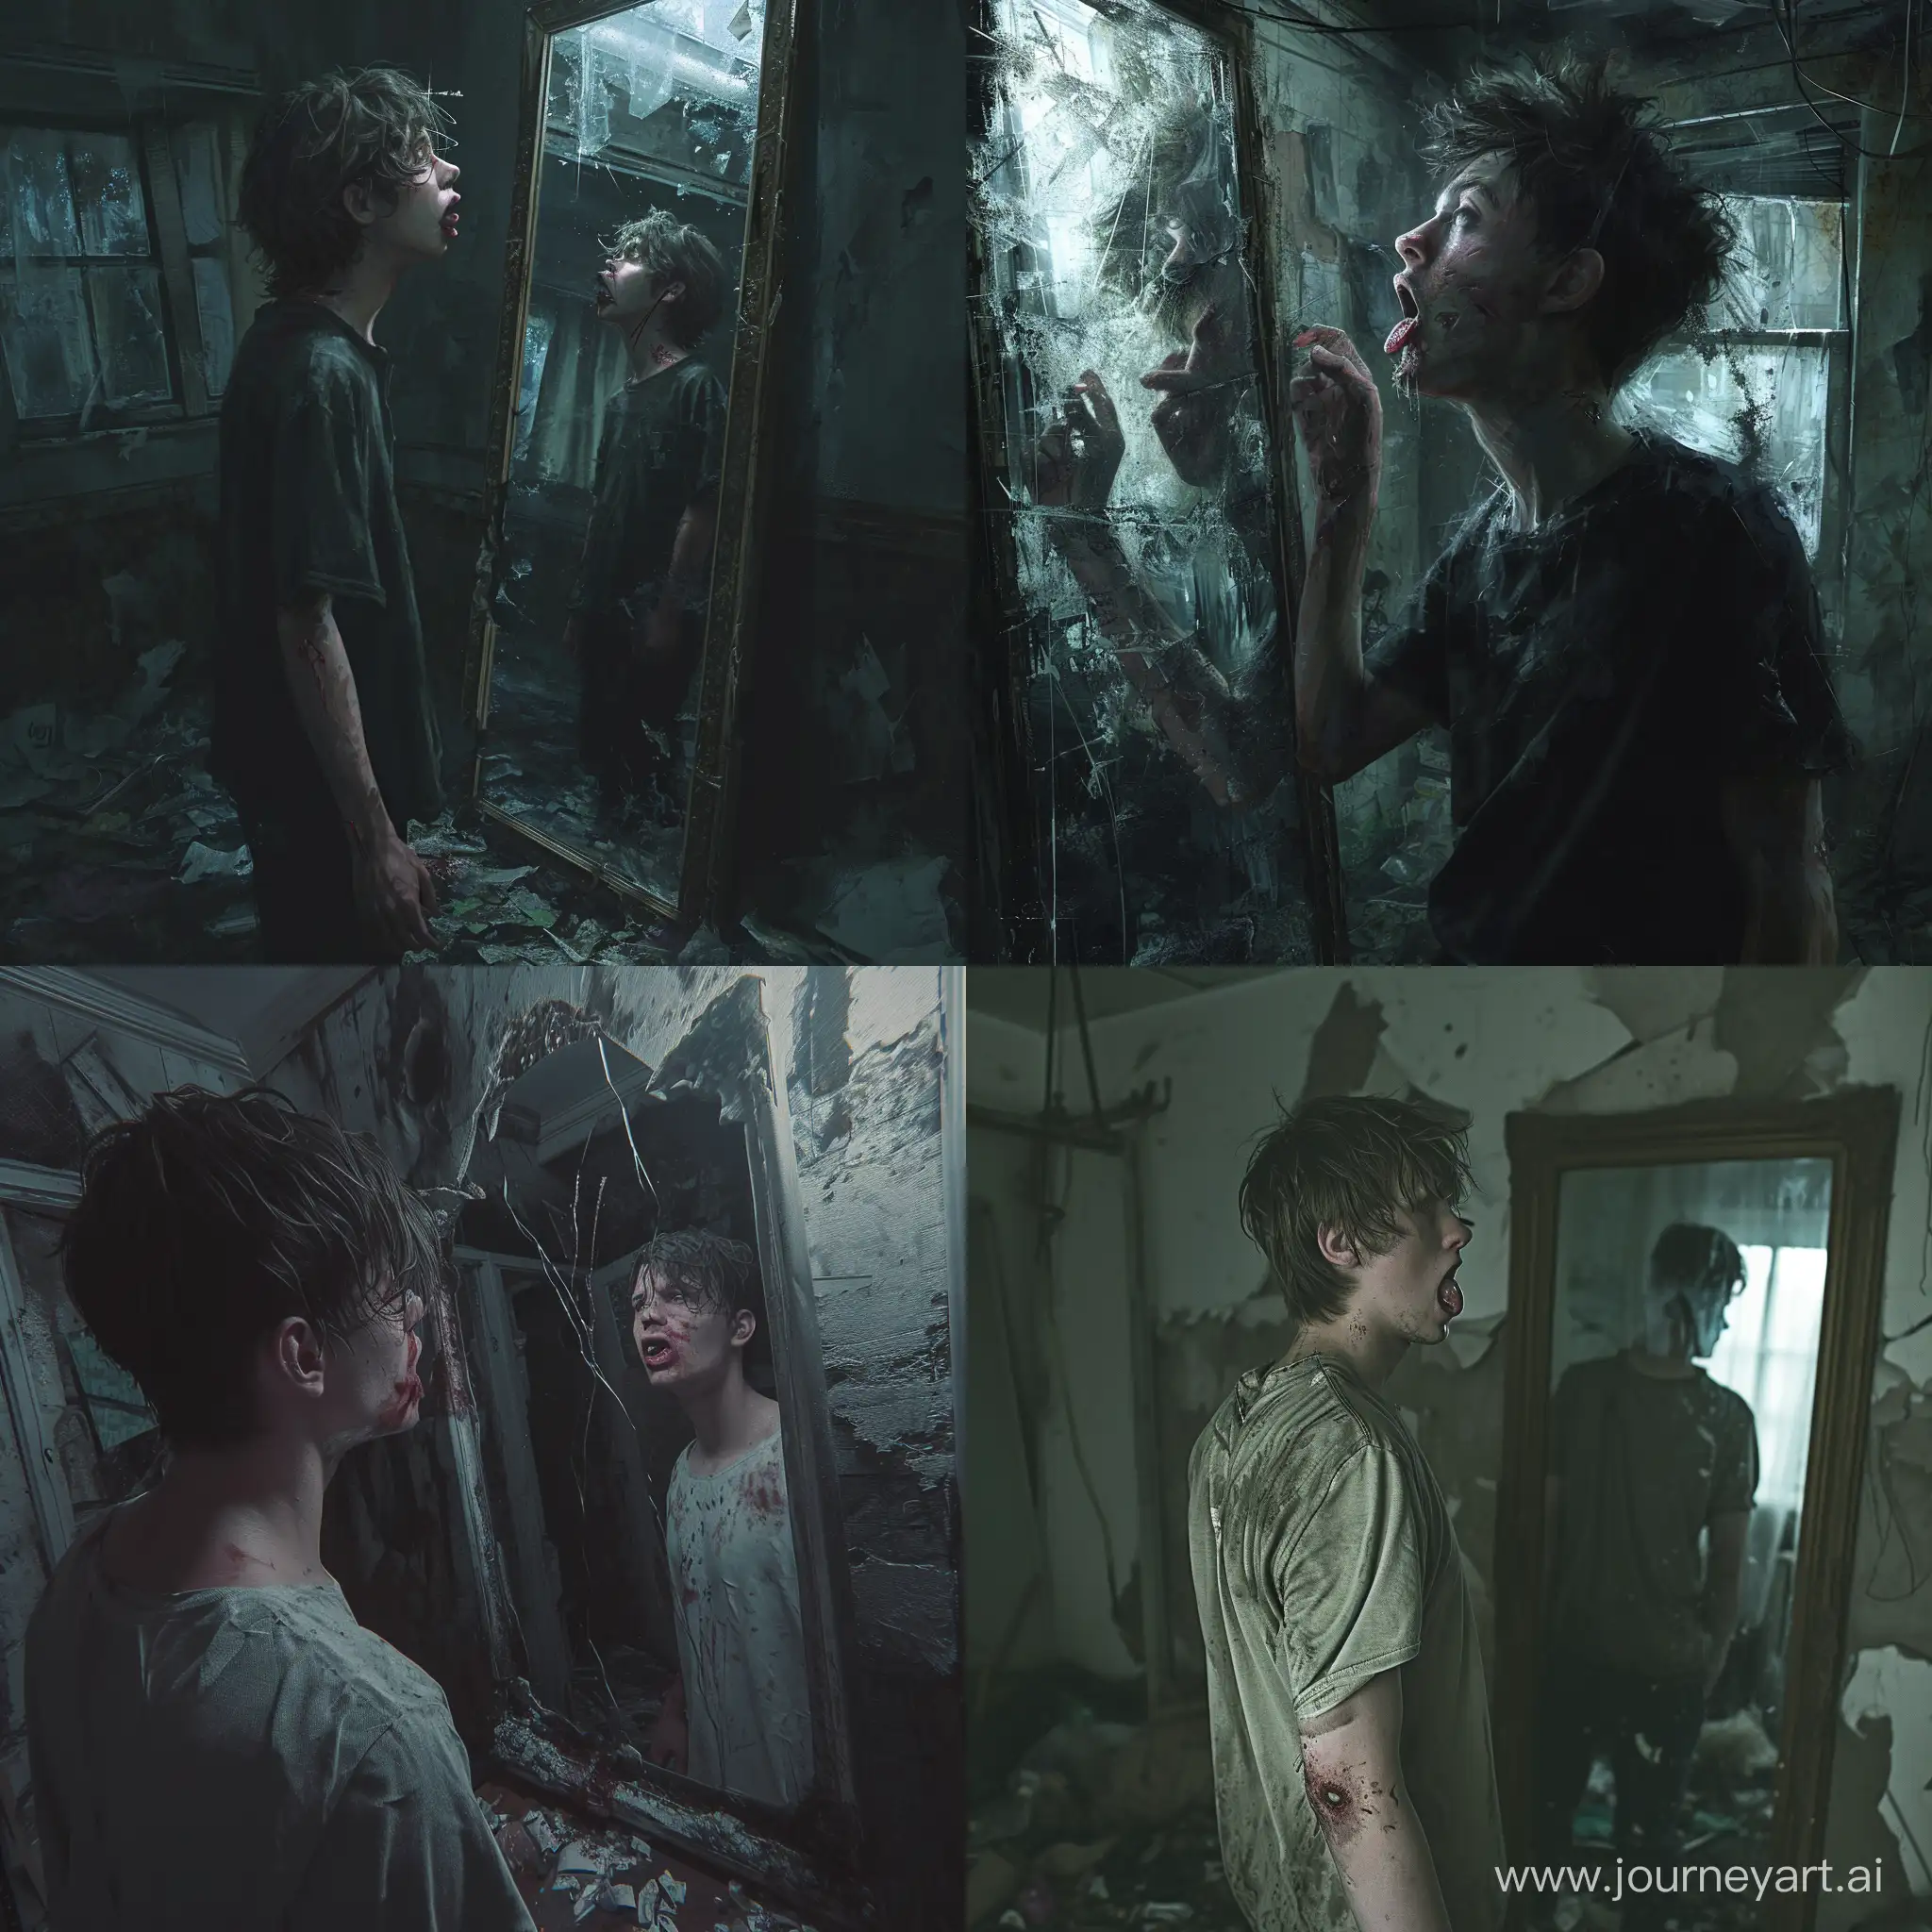 The young exhausted guy is standing in the very dark and messy room and looking in the mirror mirror. The room looks like location from "Silent Hill" videogame. He is trying to spot cuts on his tongue.